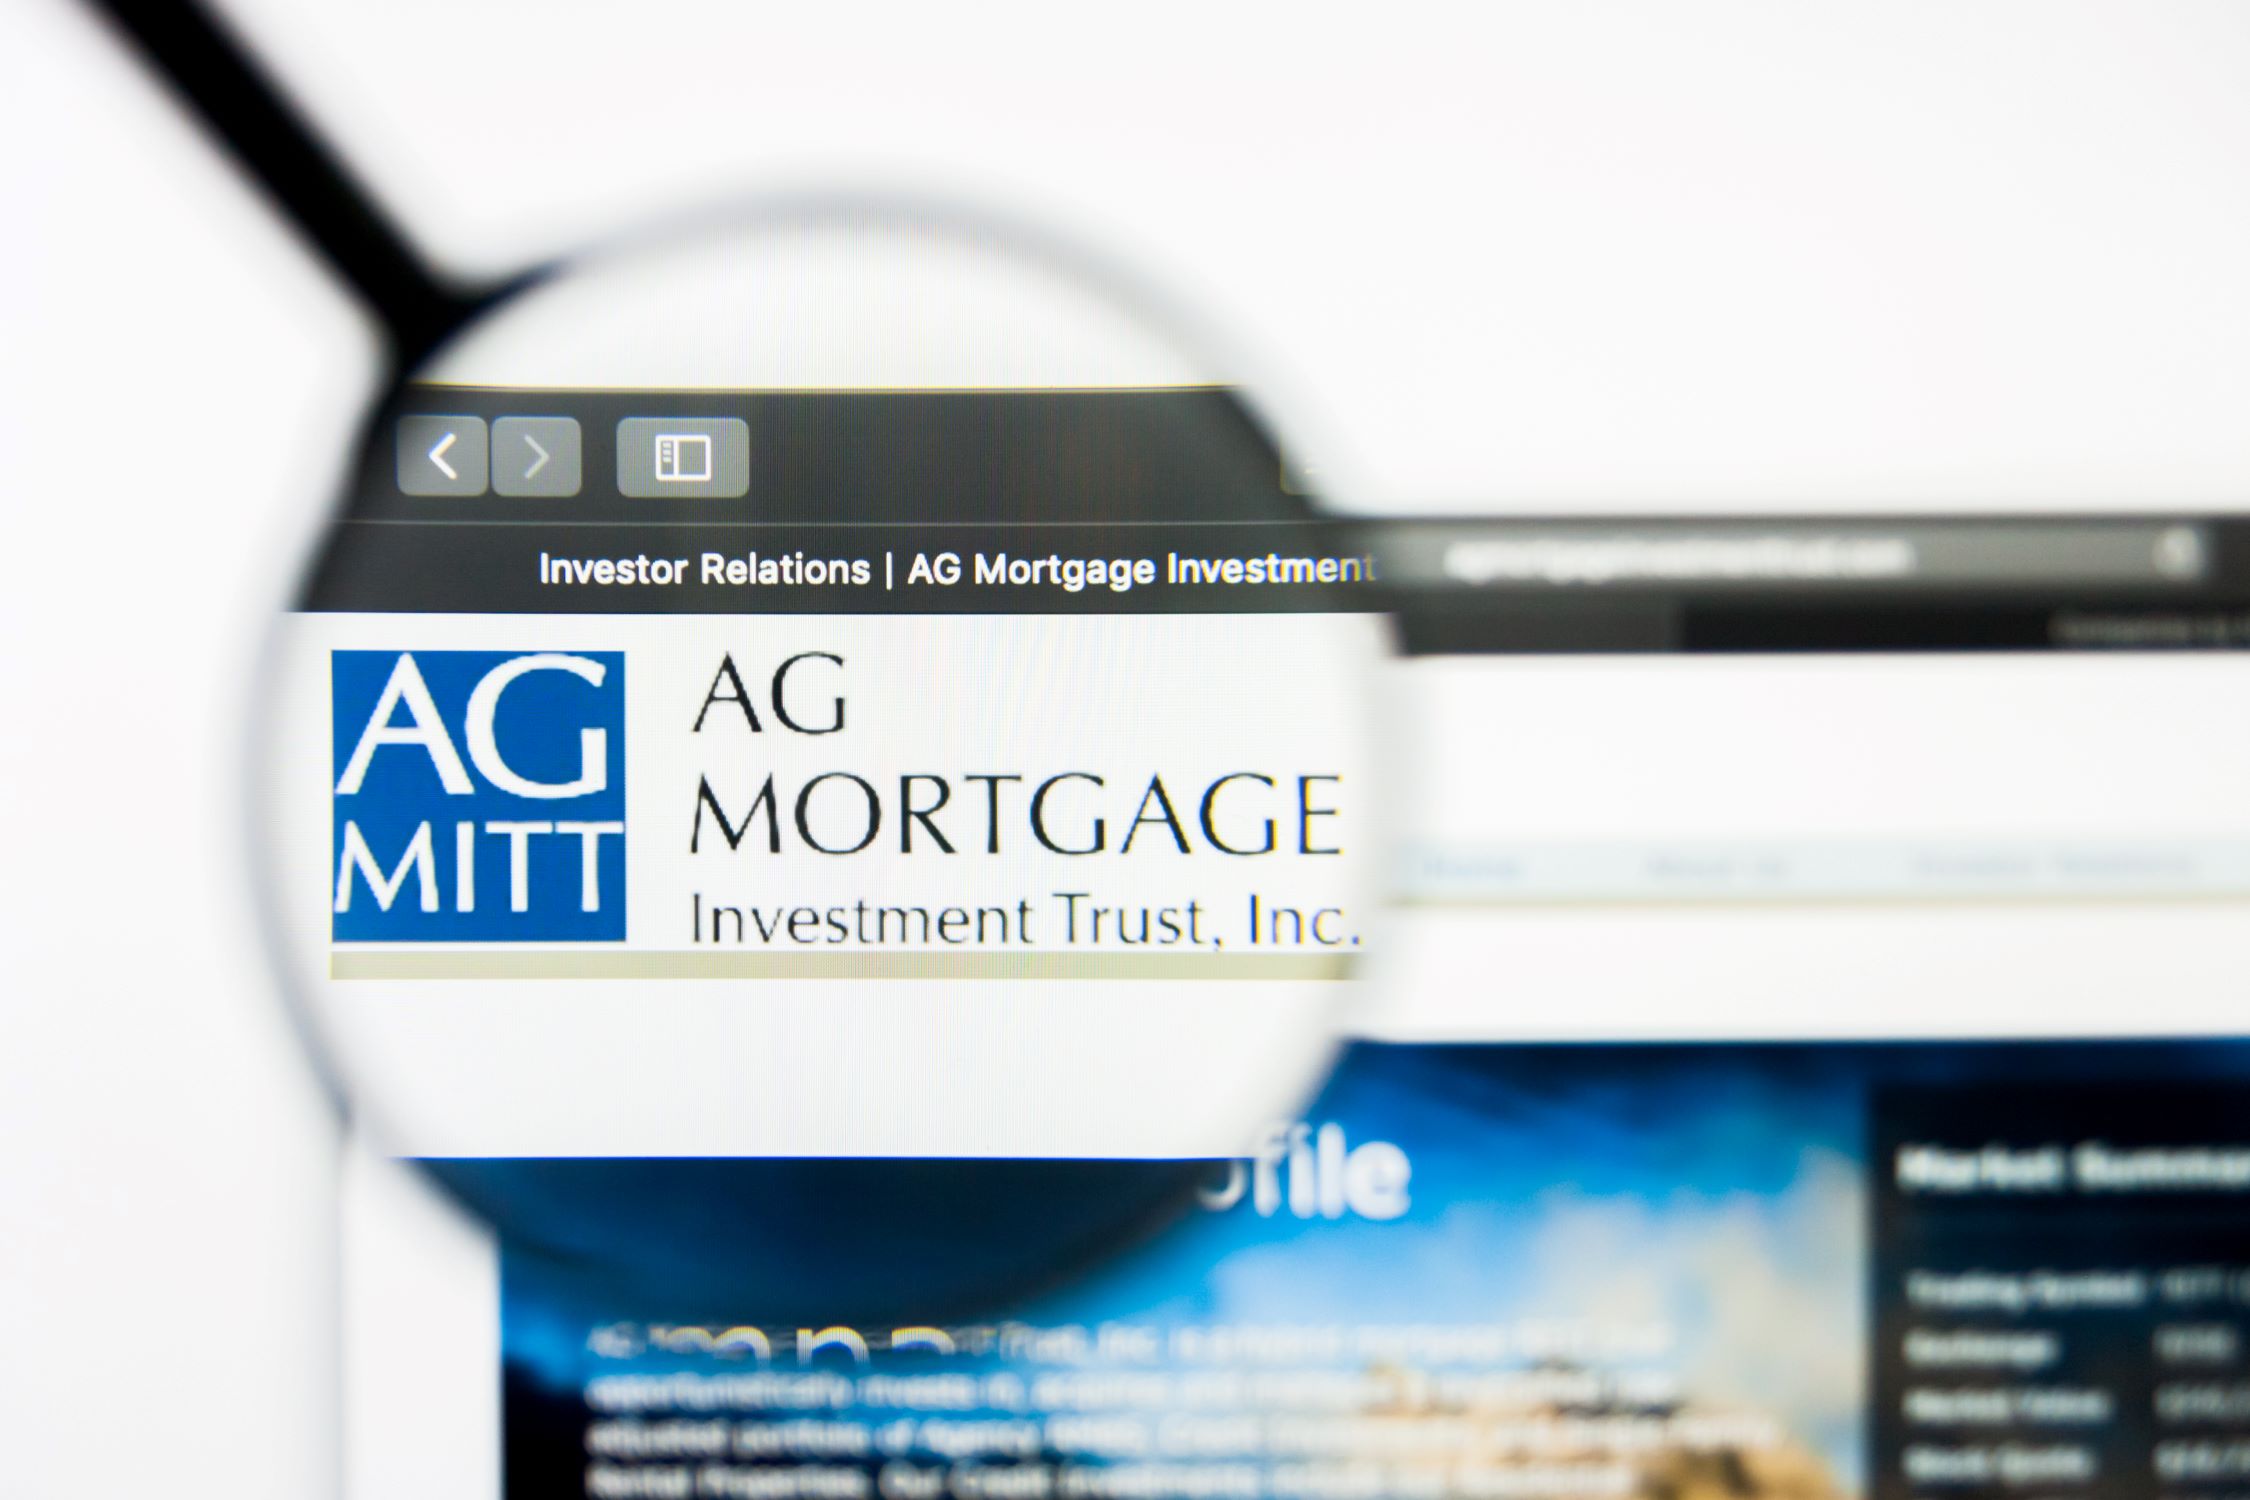 What Is The Symbol Of Ag Mortgage Investment Trust, Inc.